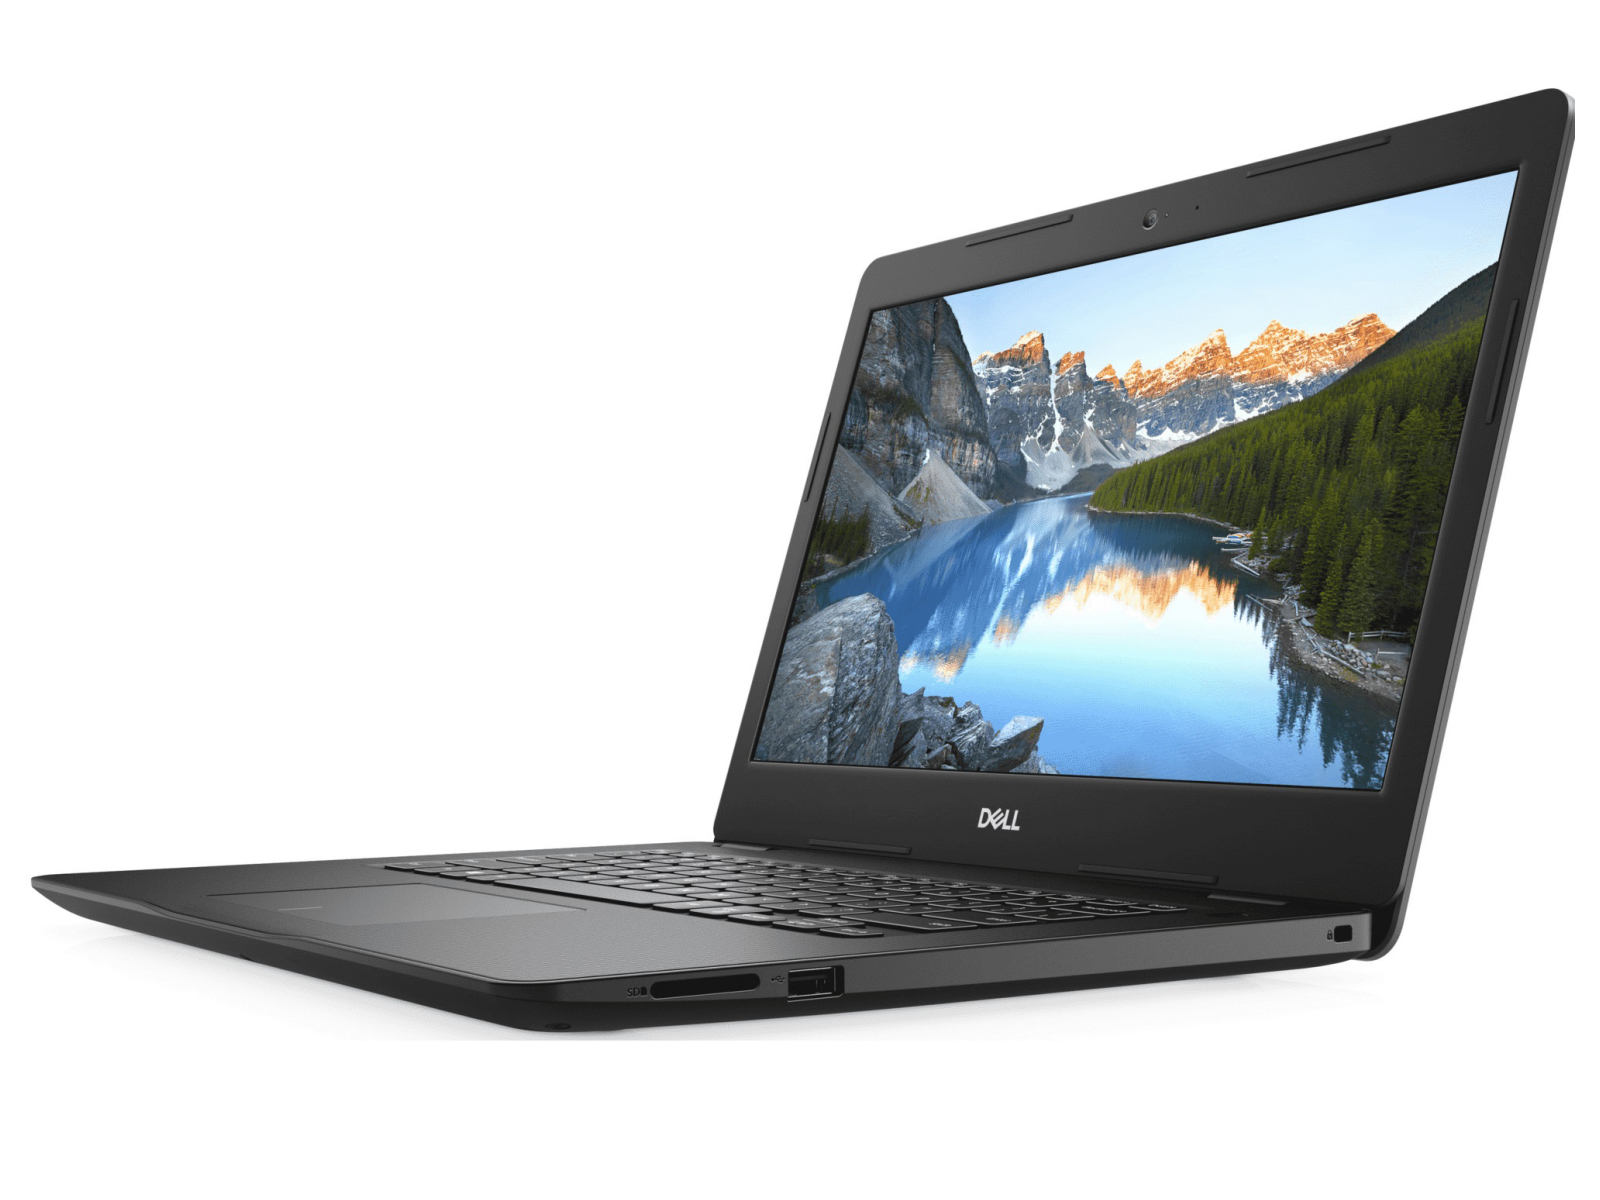 Better without dedicated GPU - The Dell Inspiron 14 3493 in Review